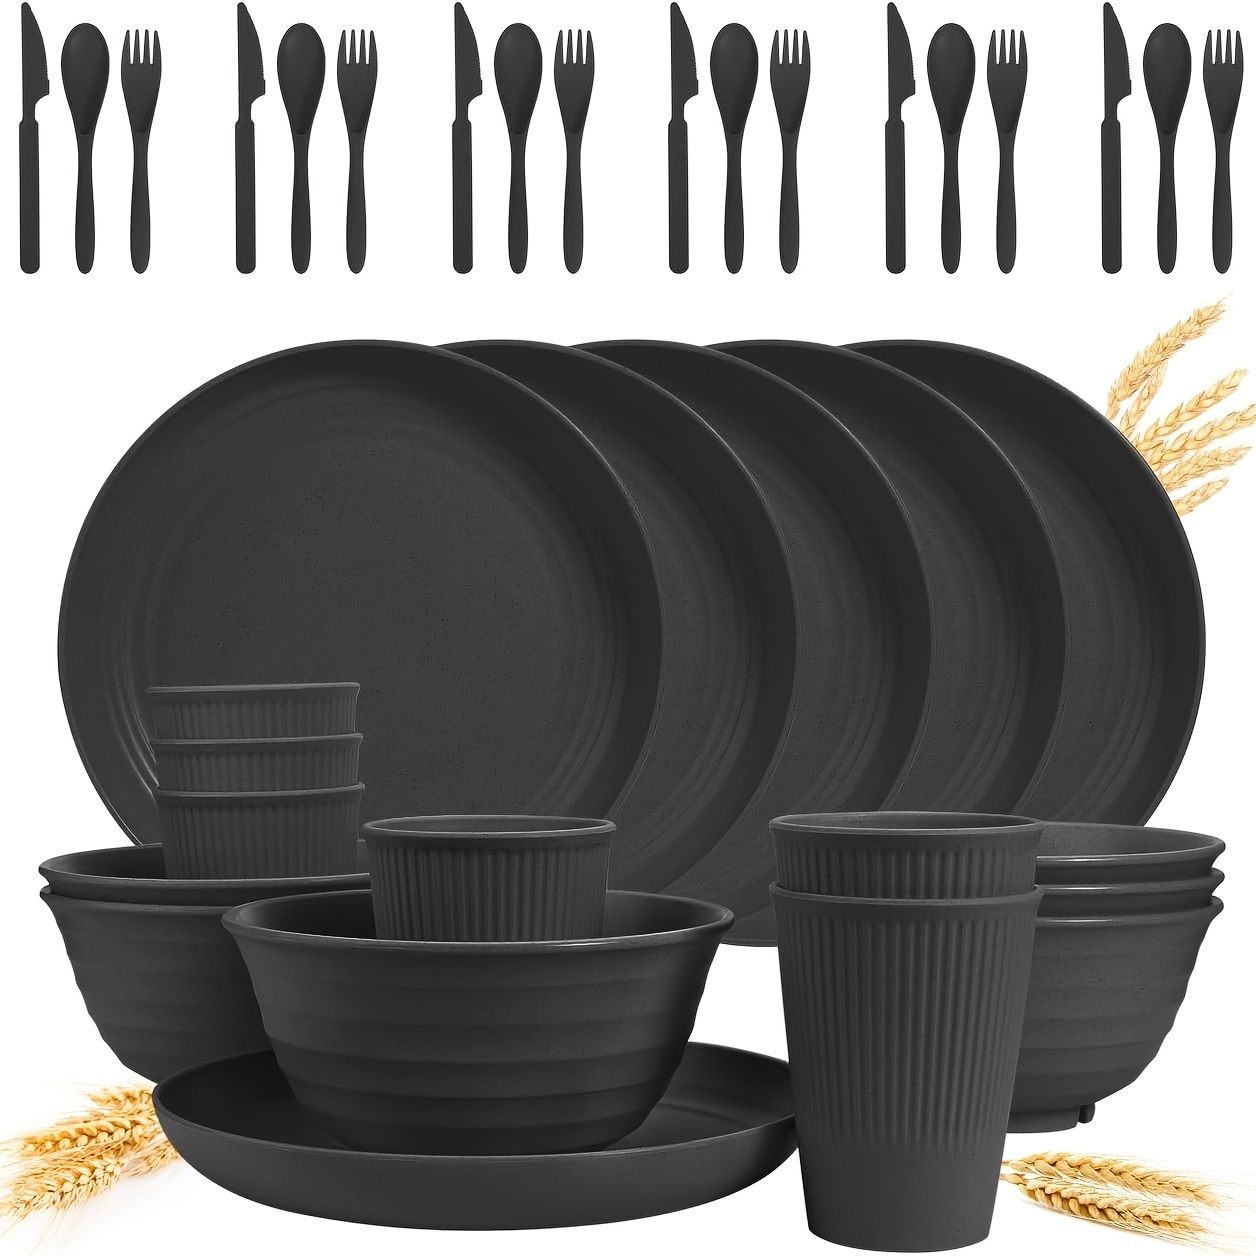 

36pcs Pp Cutlery Set - Unbreakable Cutlery Set, Reusable Plastic Plates And Bowls Set, Travel Camping Cutlery Set, Dishwasher Microwave Safe Cutlery Set - Black